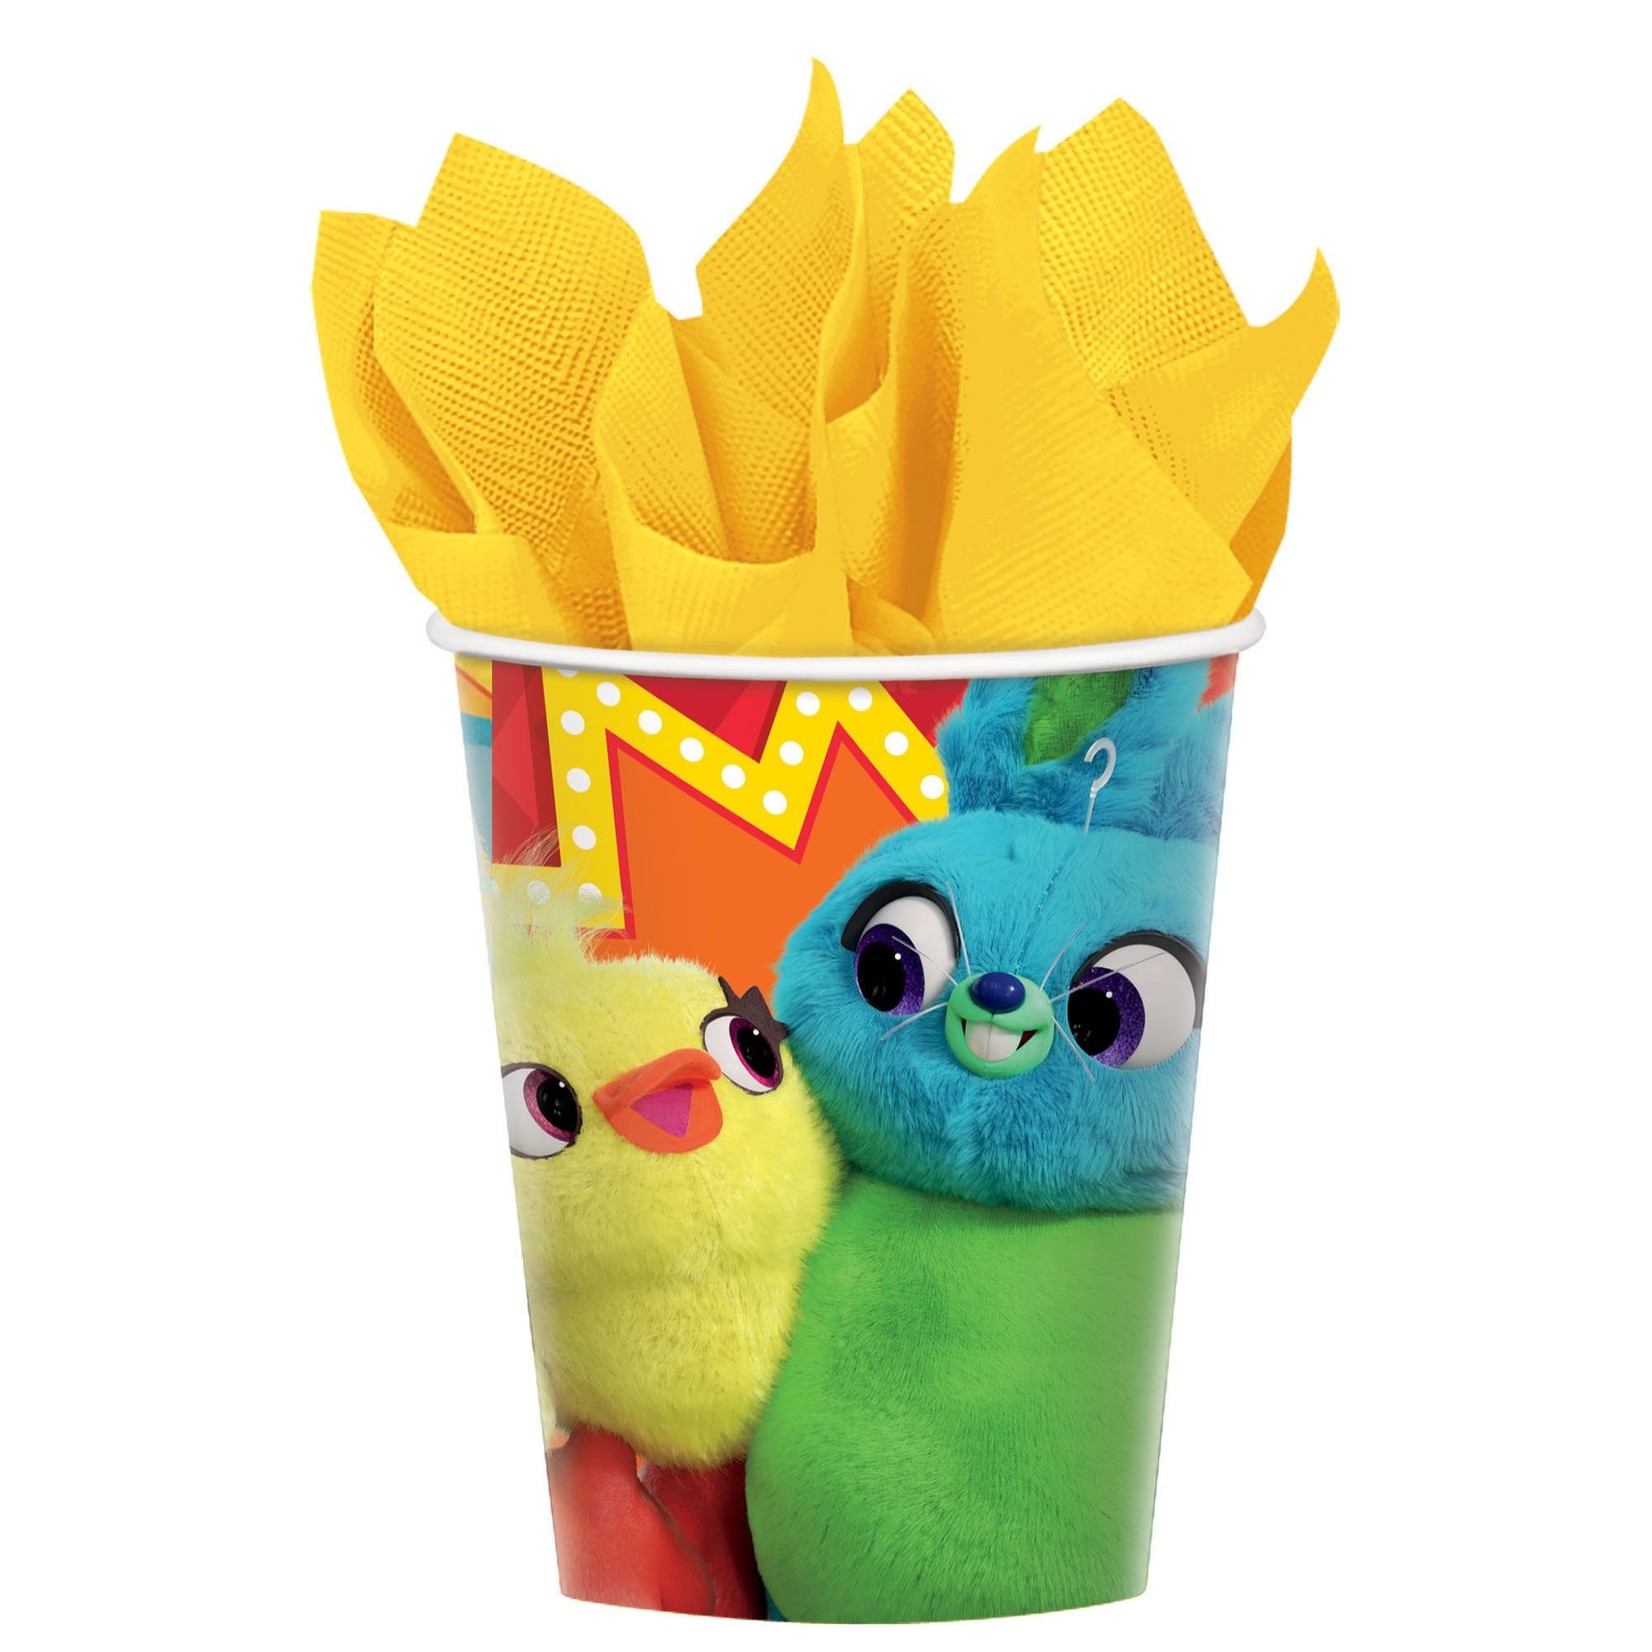 Toy Story 4 Cups